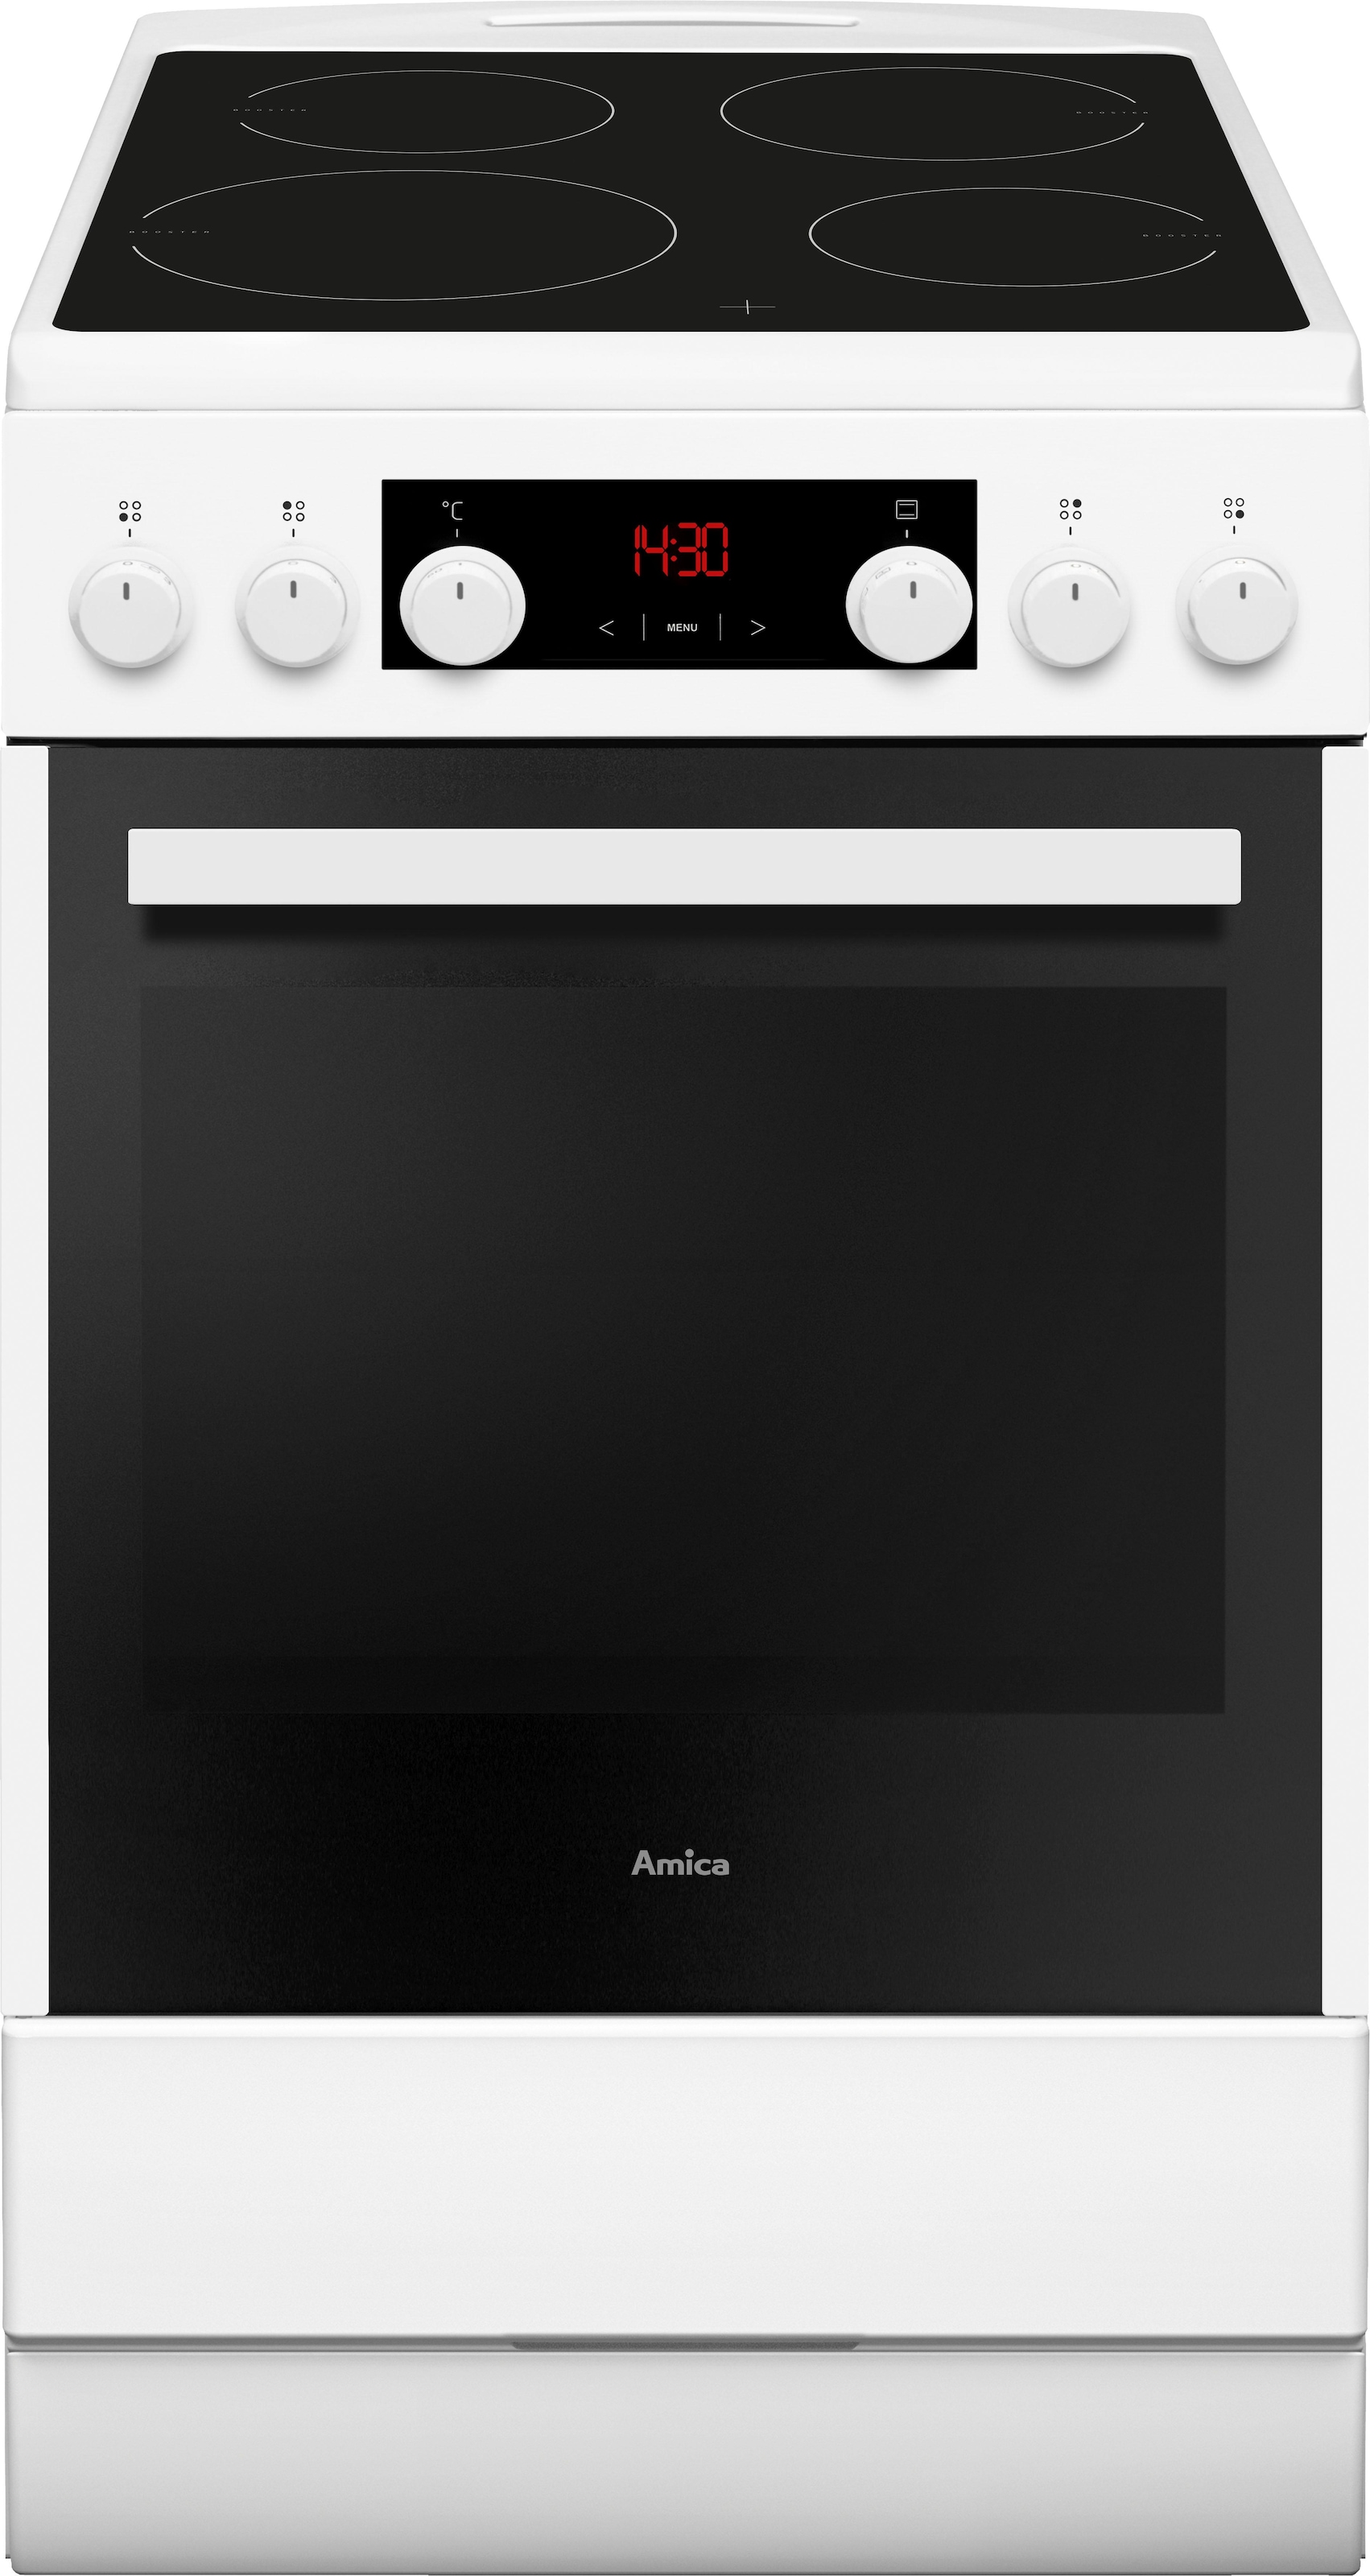 Amica Induktions-Standherd »SHI 905 100 W«, SHI 905 100 W, Steam Clean, RapidWarmUp-Funktion